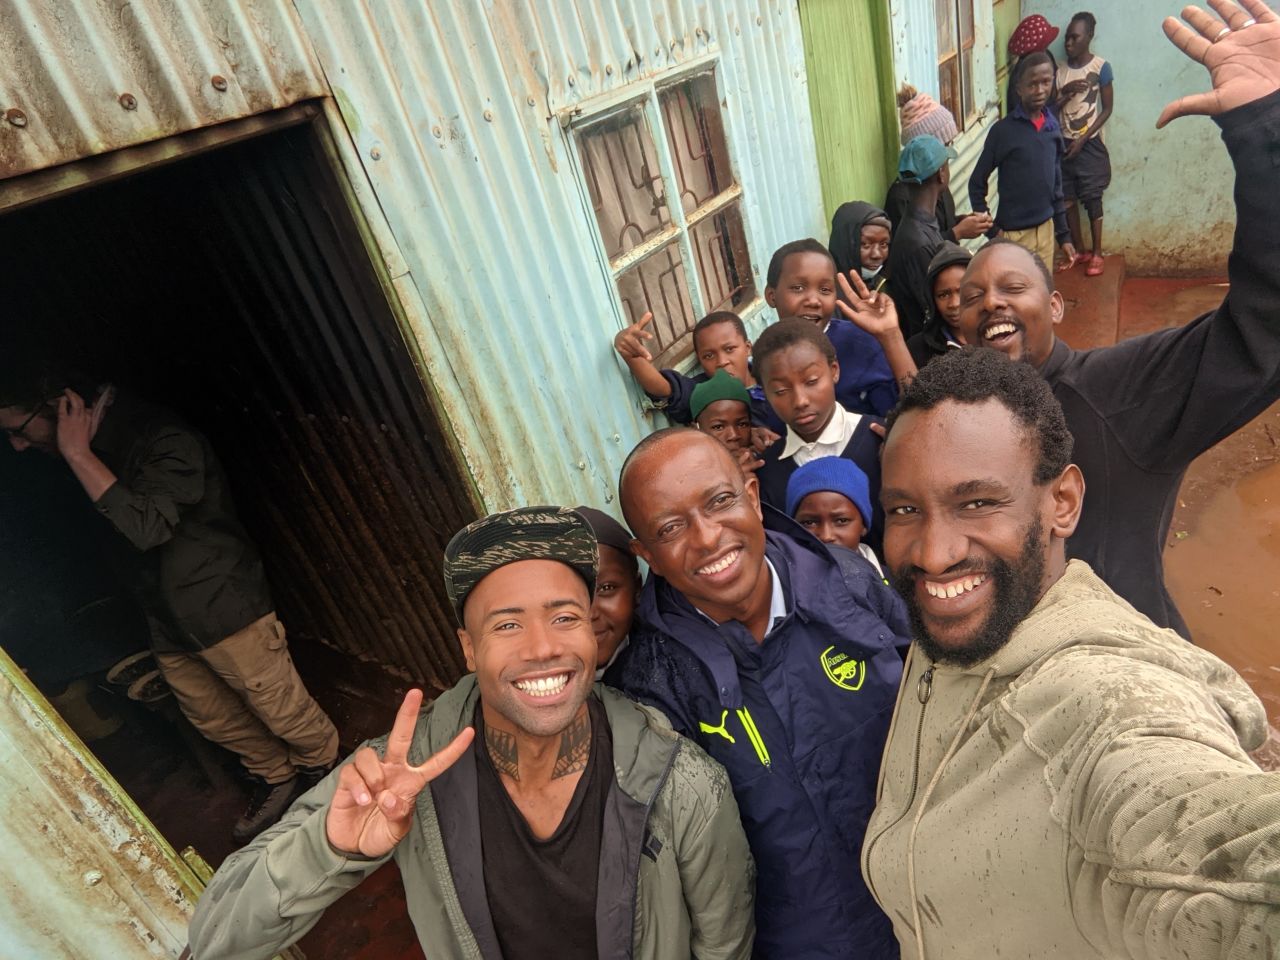 King also likes to give back to the communities around the mountains he climbs by volunteering with local nonprofits. He's pictured here with members of the Moving Mountain Trust in Nairobi, Kenya before making the trek up Mt. Kenya on December 8, 2021.